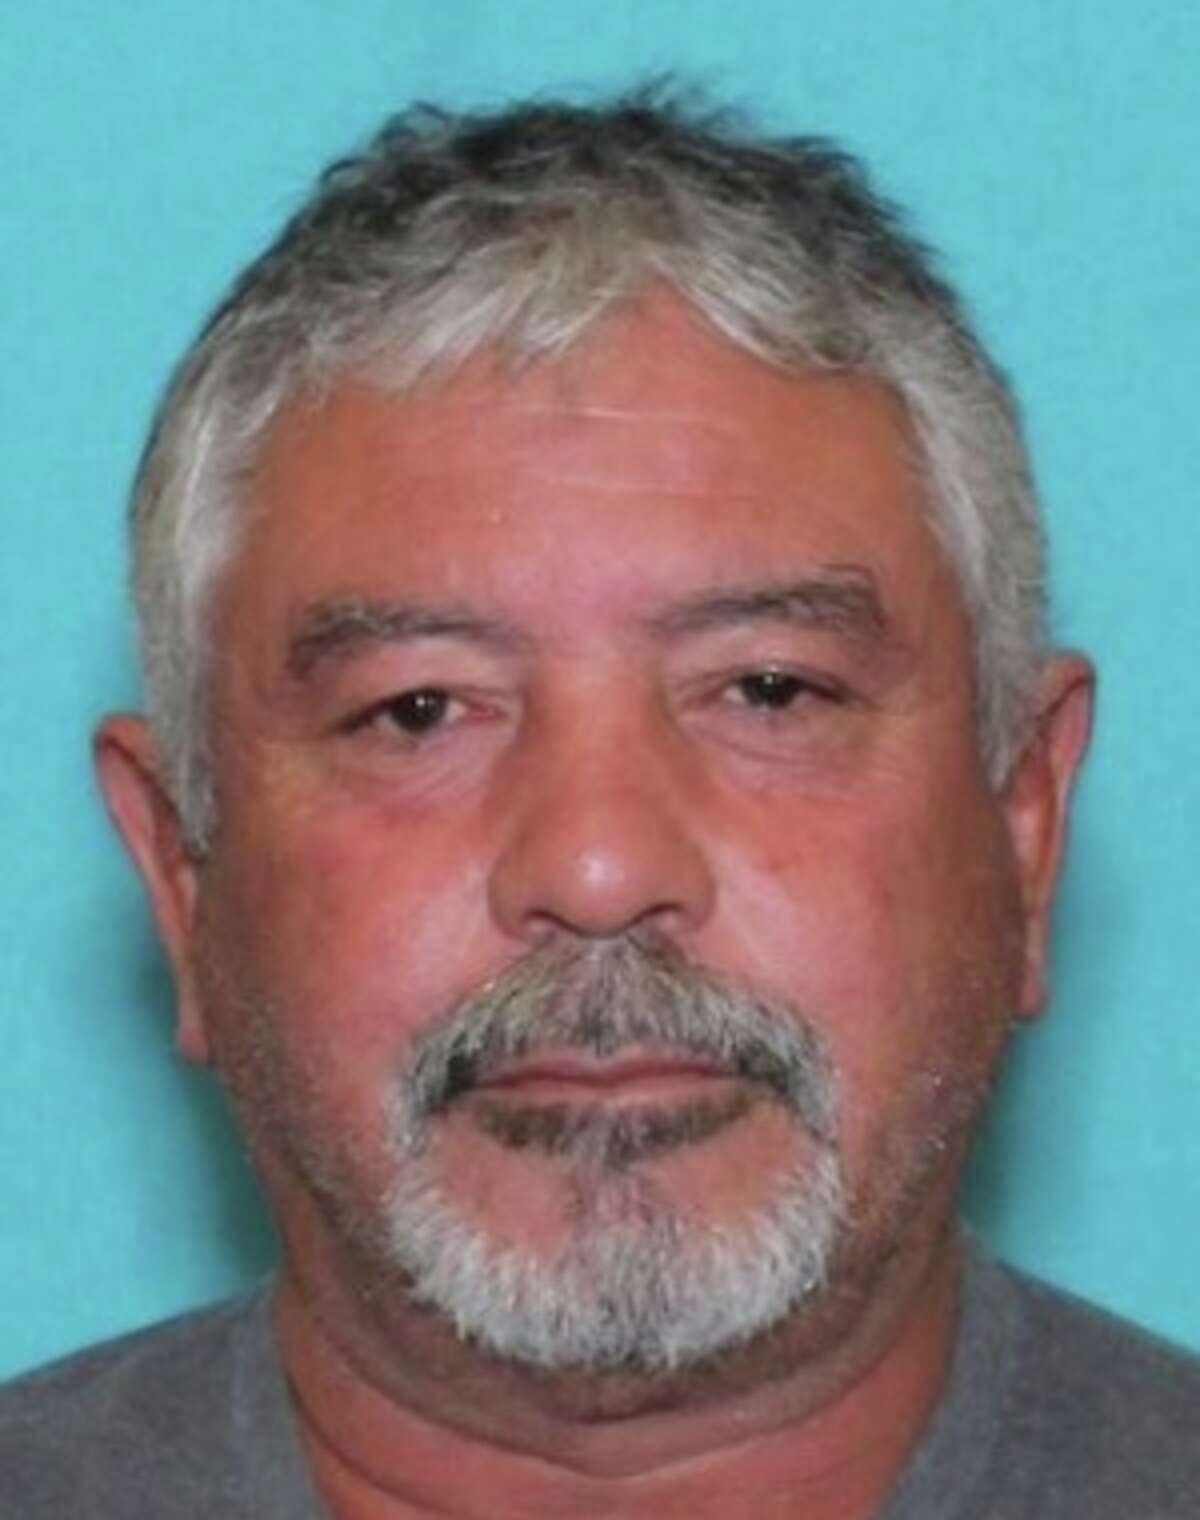 Salomon Olivas Marquez, 59, is wanted for failure to comply with sex offender registration requirements with a previous conviction. Marquez has ties to the Midland/Odessa area, according to the DPS bulletin. 